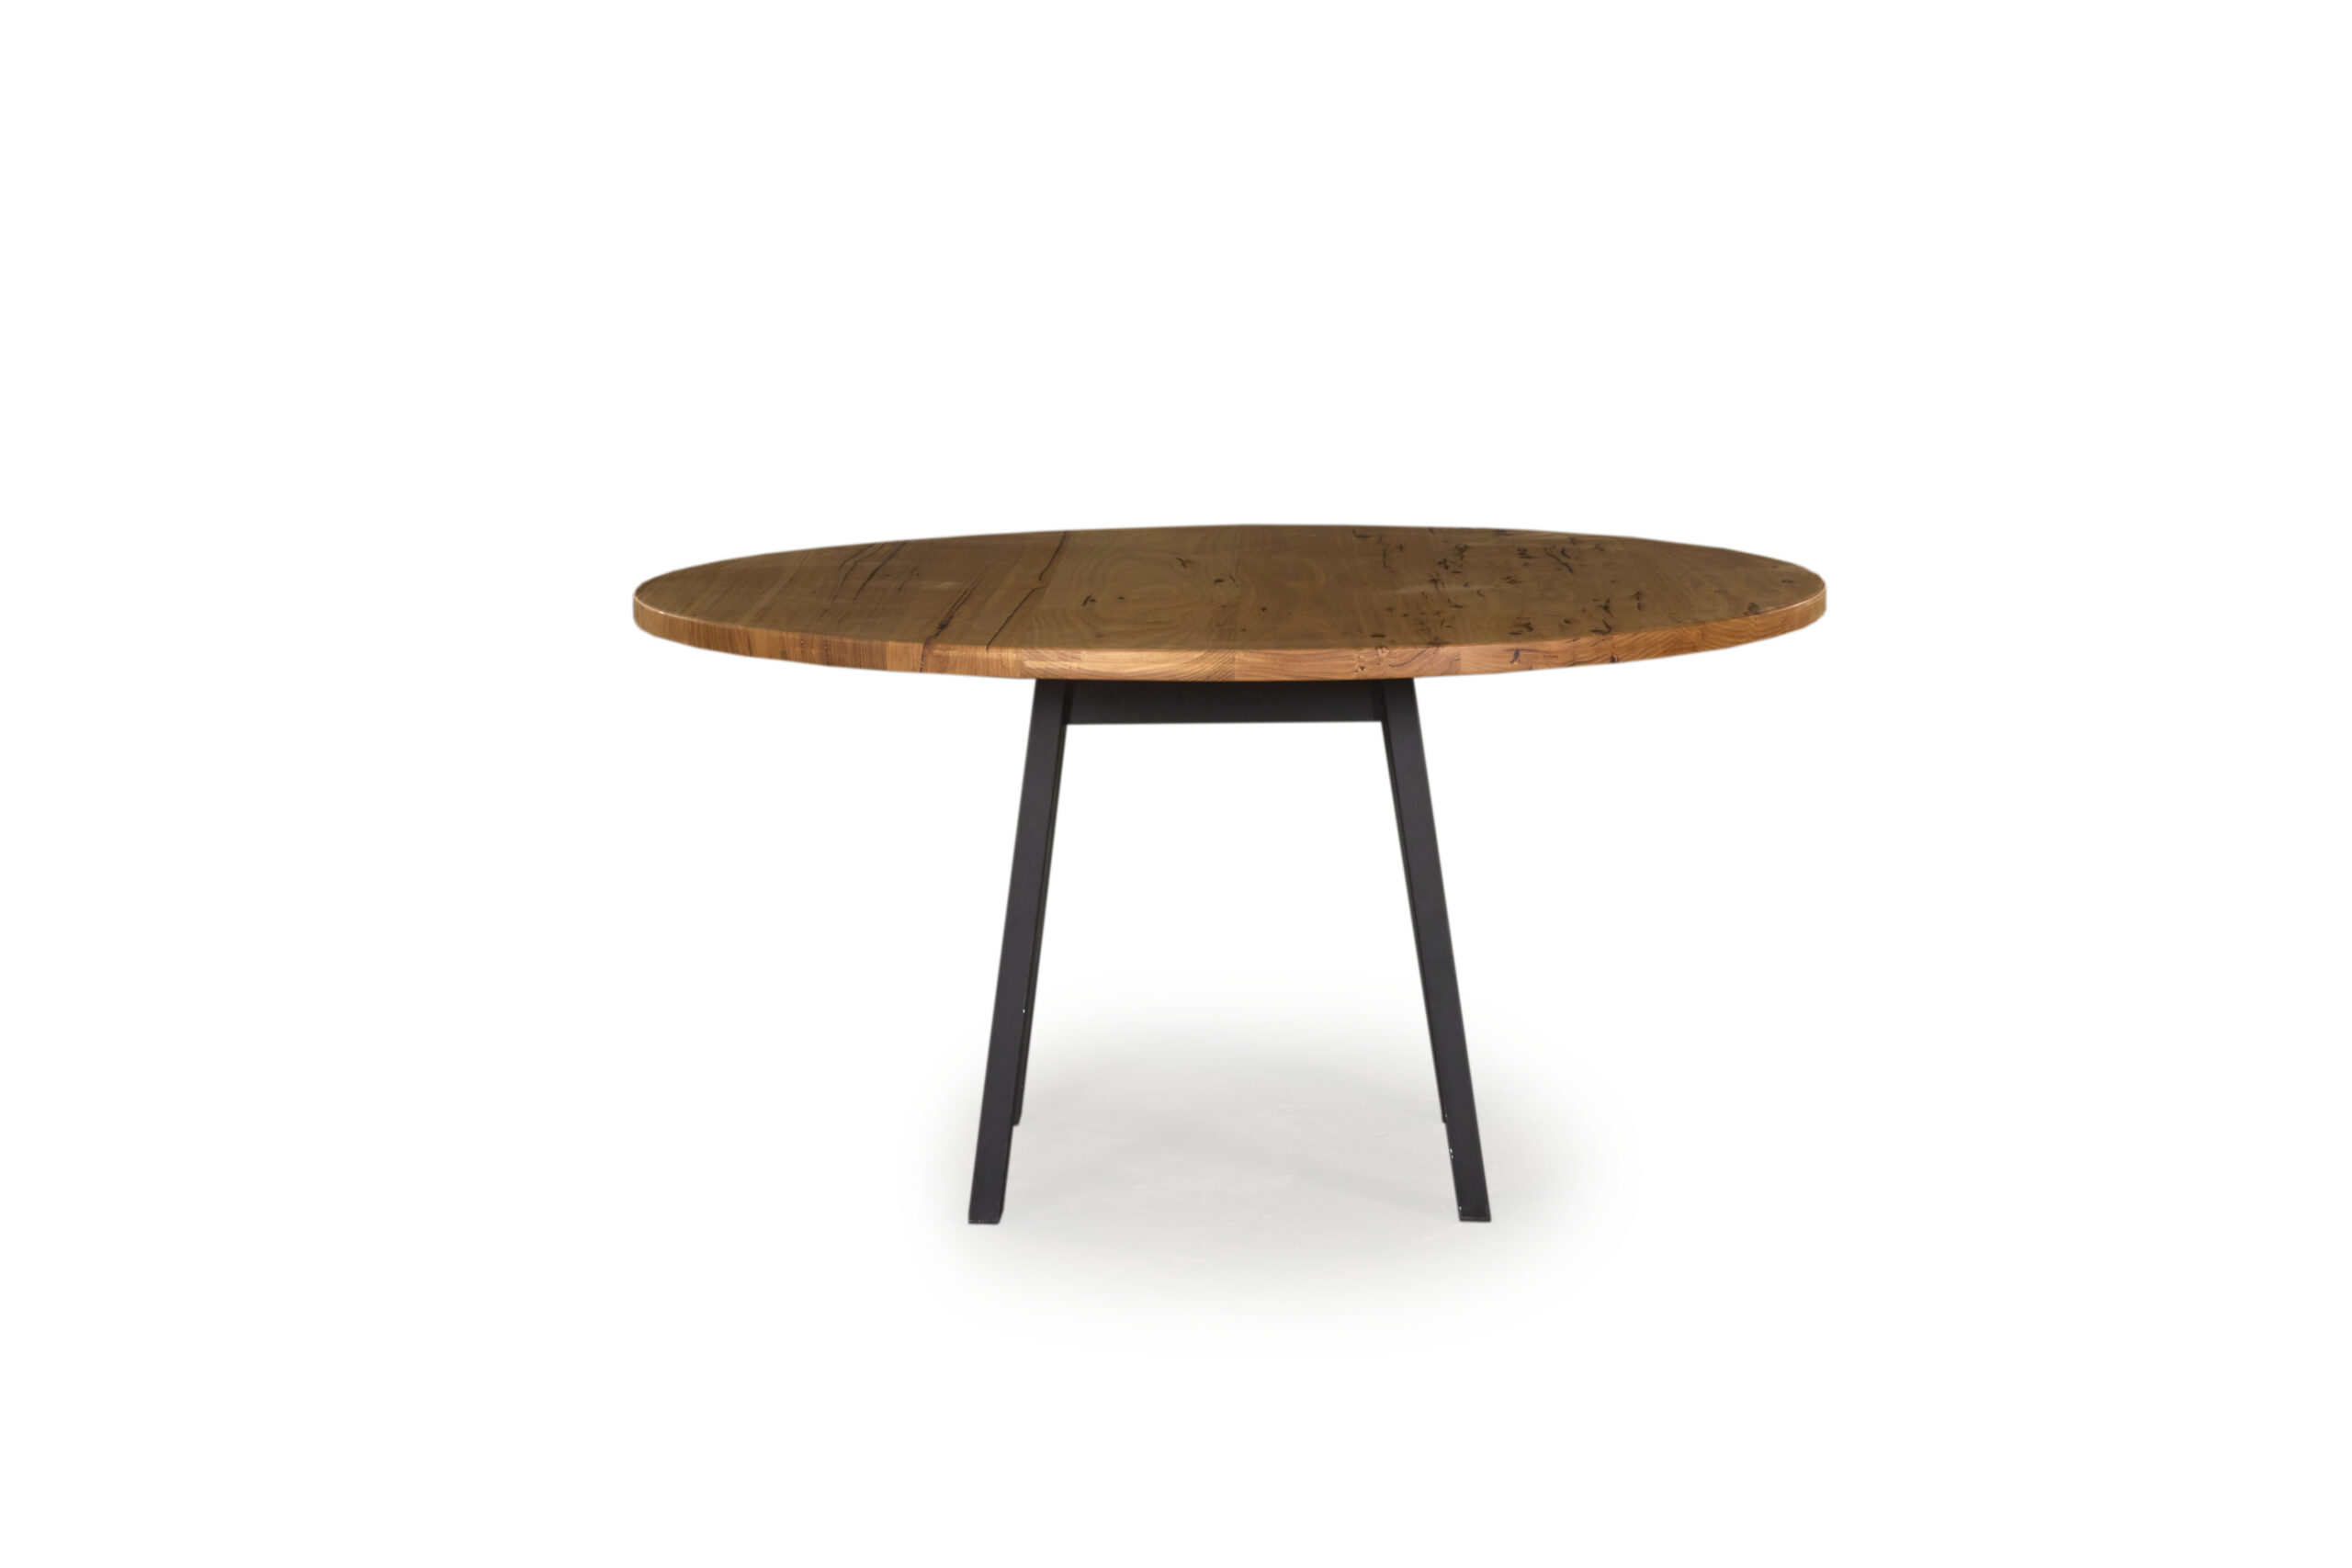 Kooyong Round Dining Table A stylish and versatile centerpiece by Arranmore Furniture featuring a round tabletop and sturdy base Perfect for modern dining spaces seeking timeless elegance